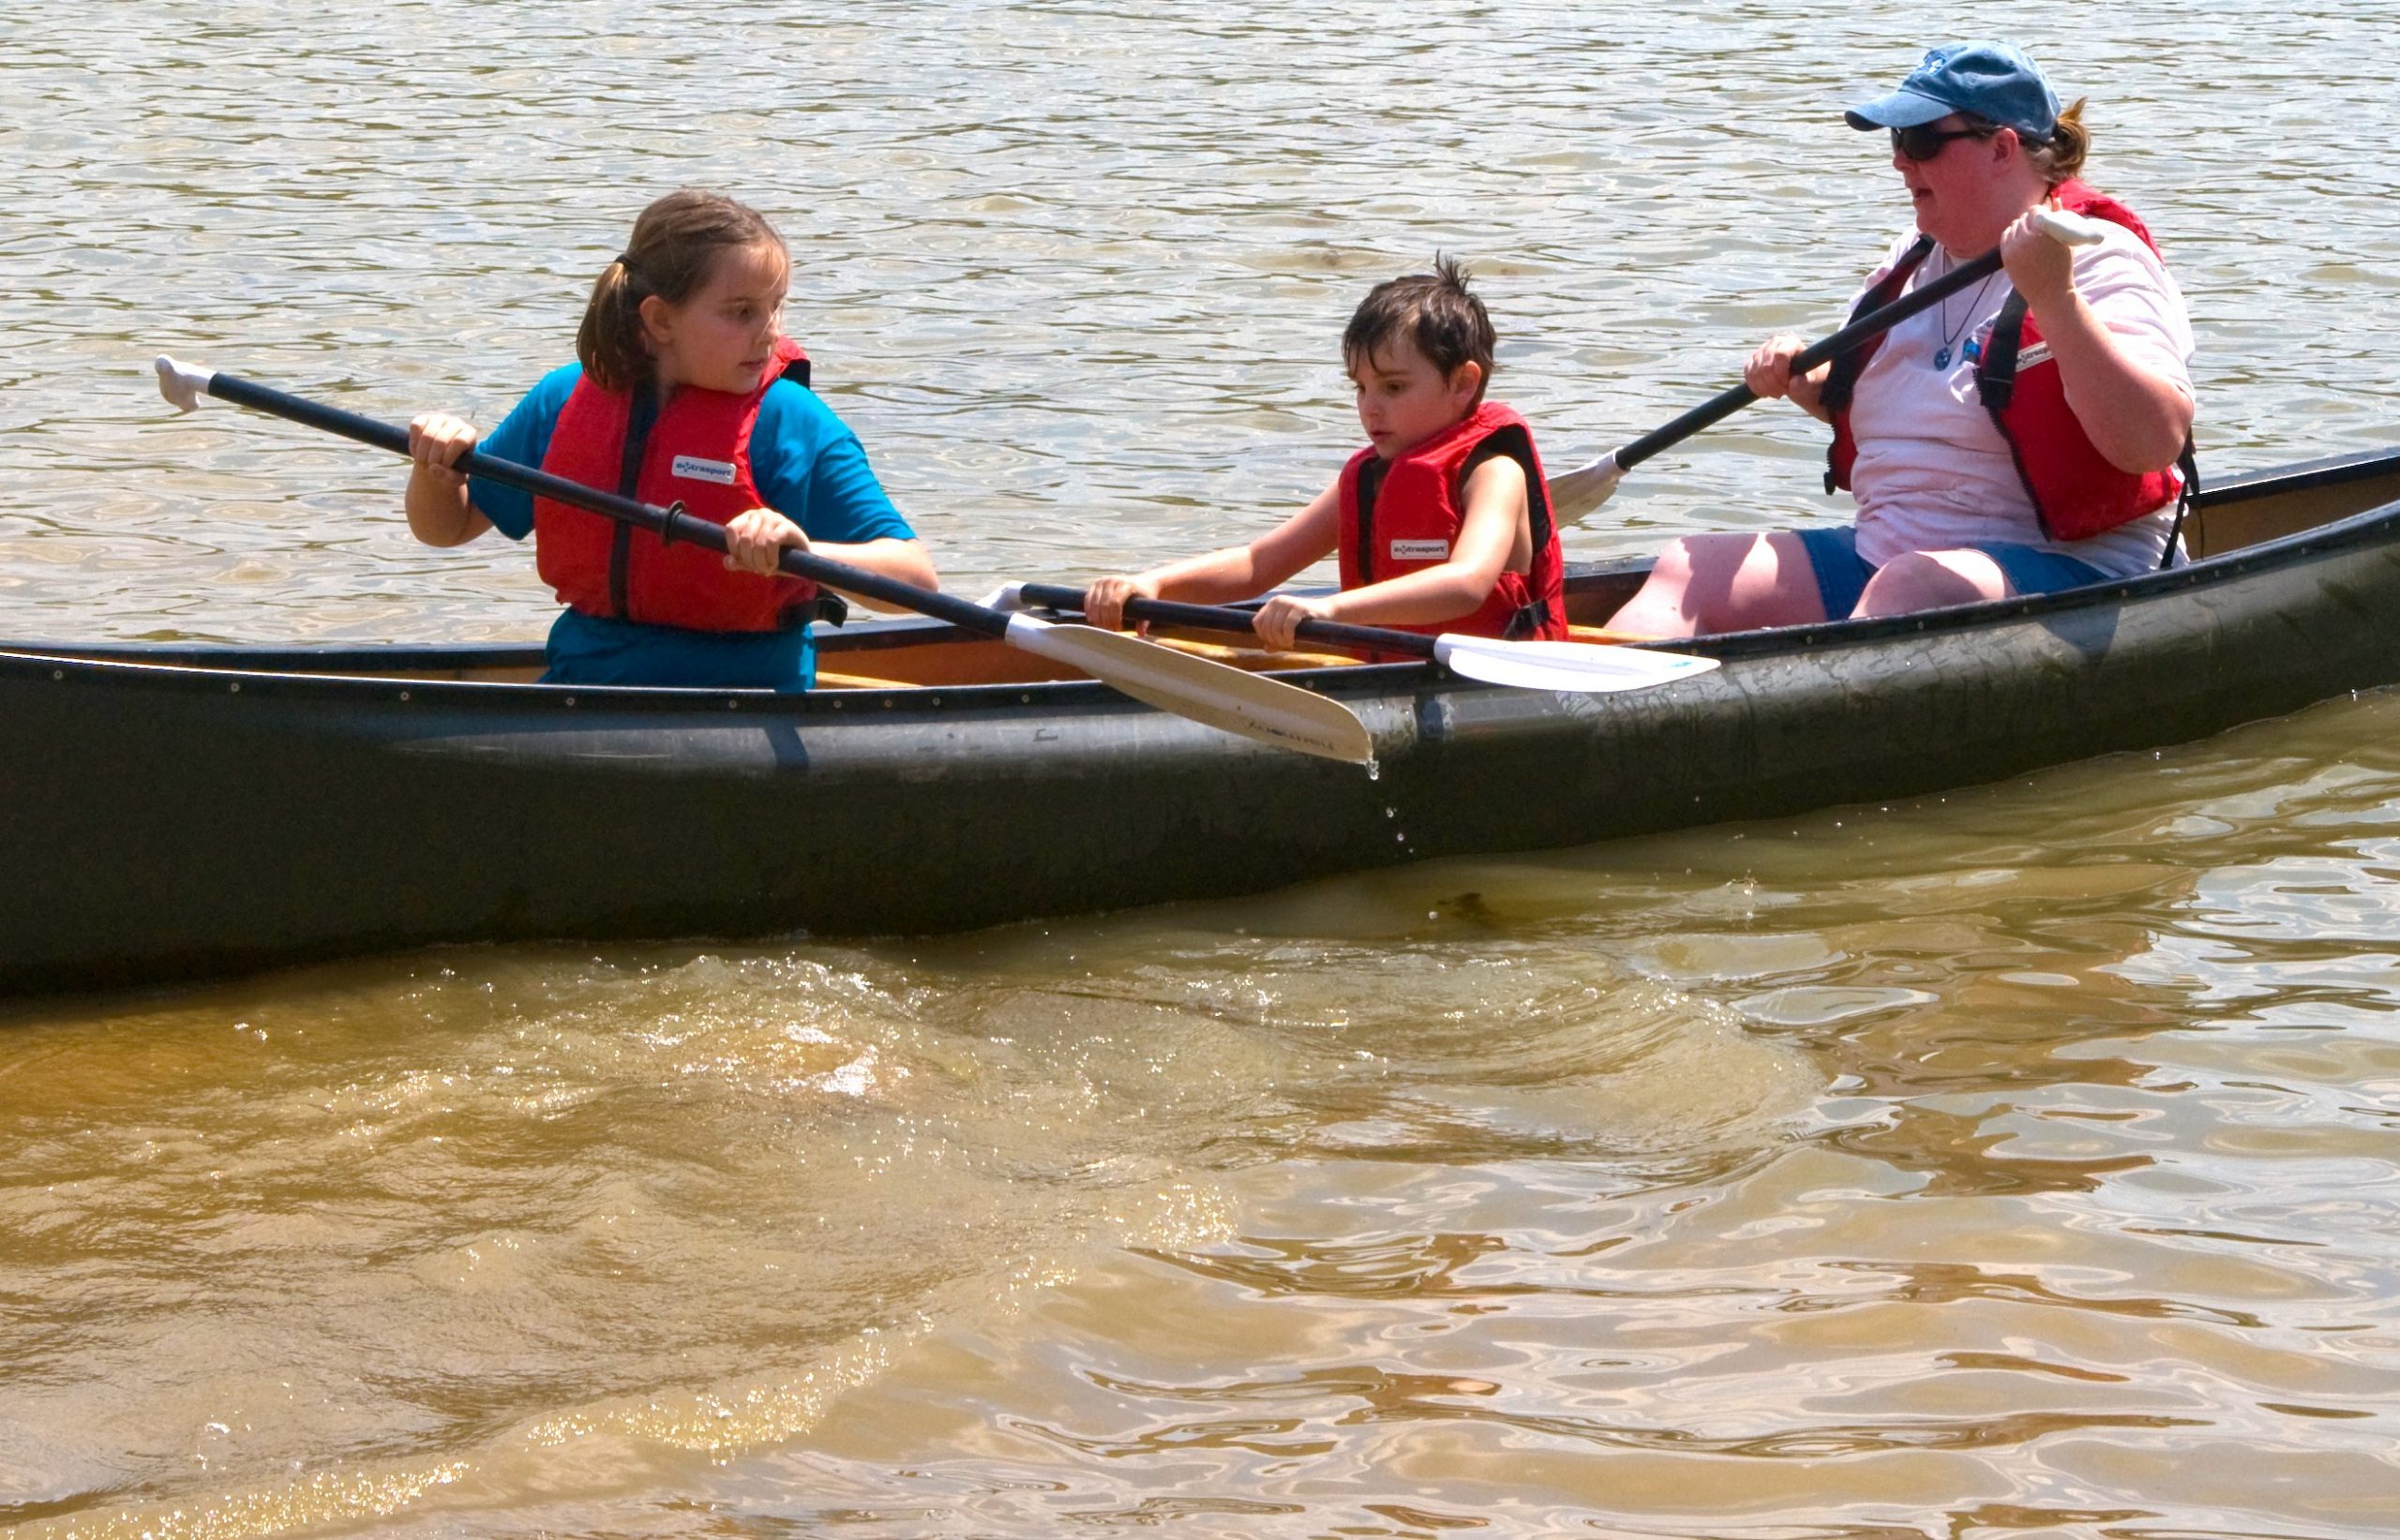 An image of three people in a canoe wearing orange safety vests.